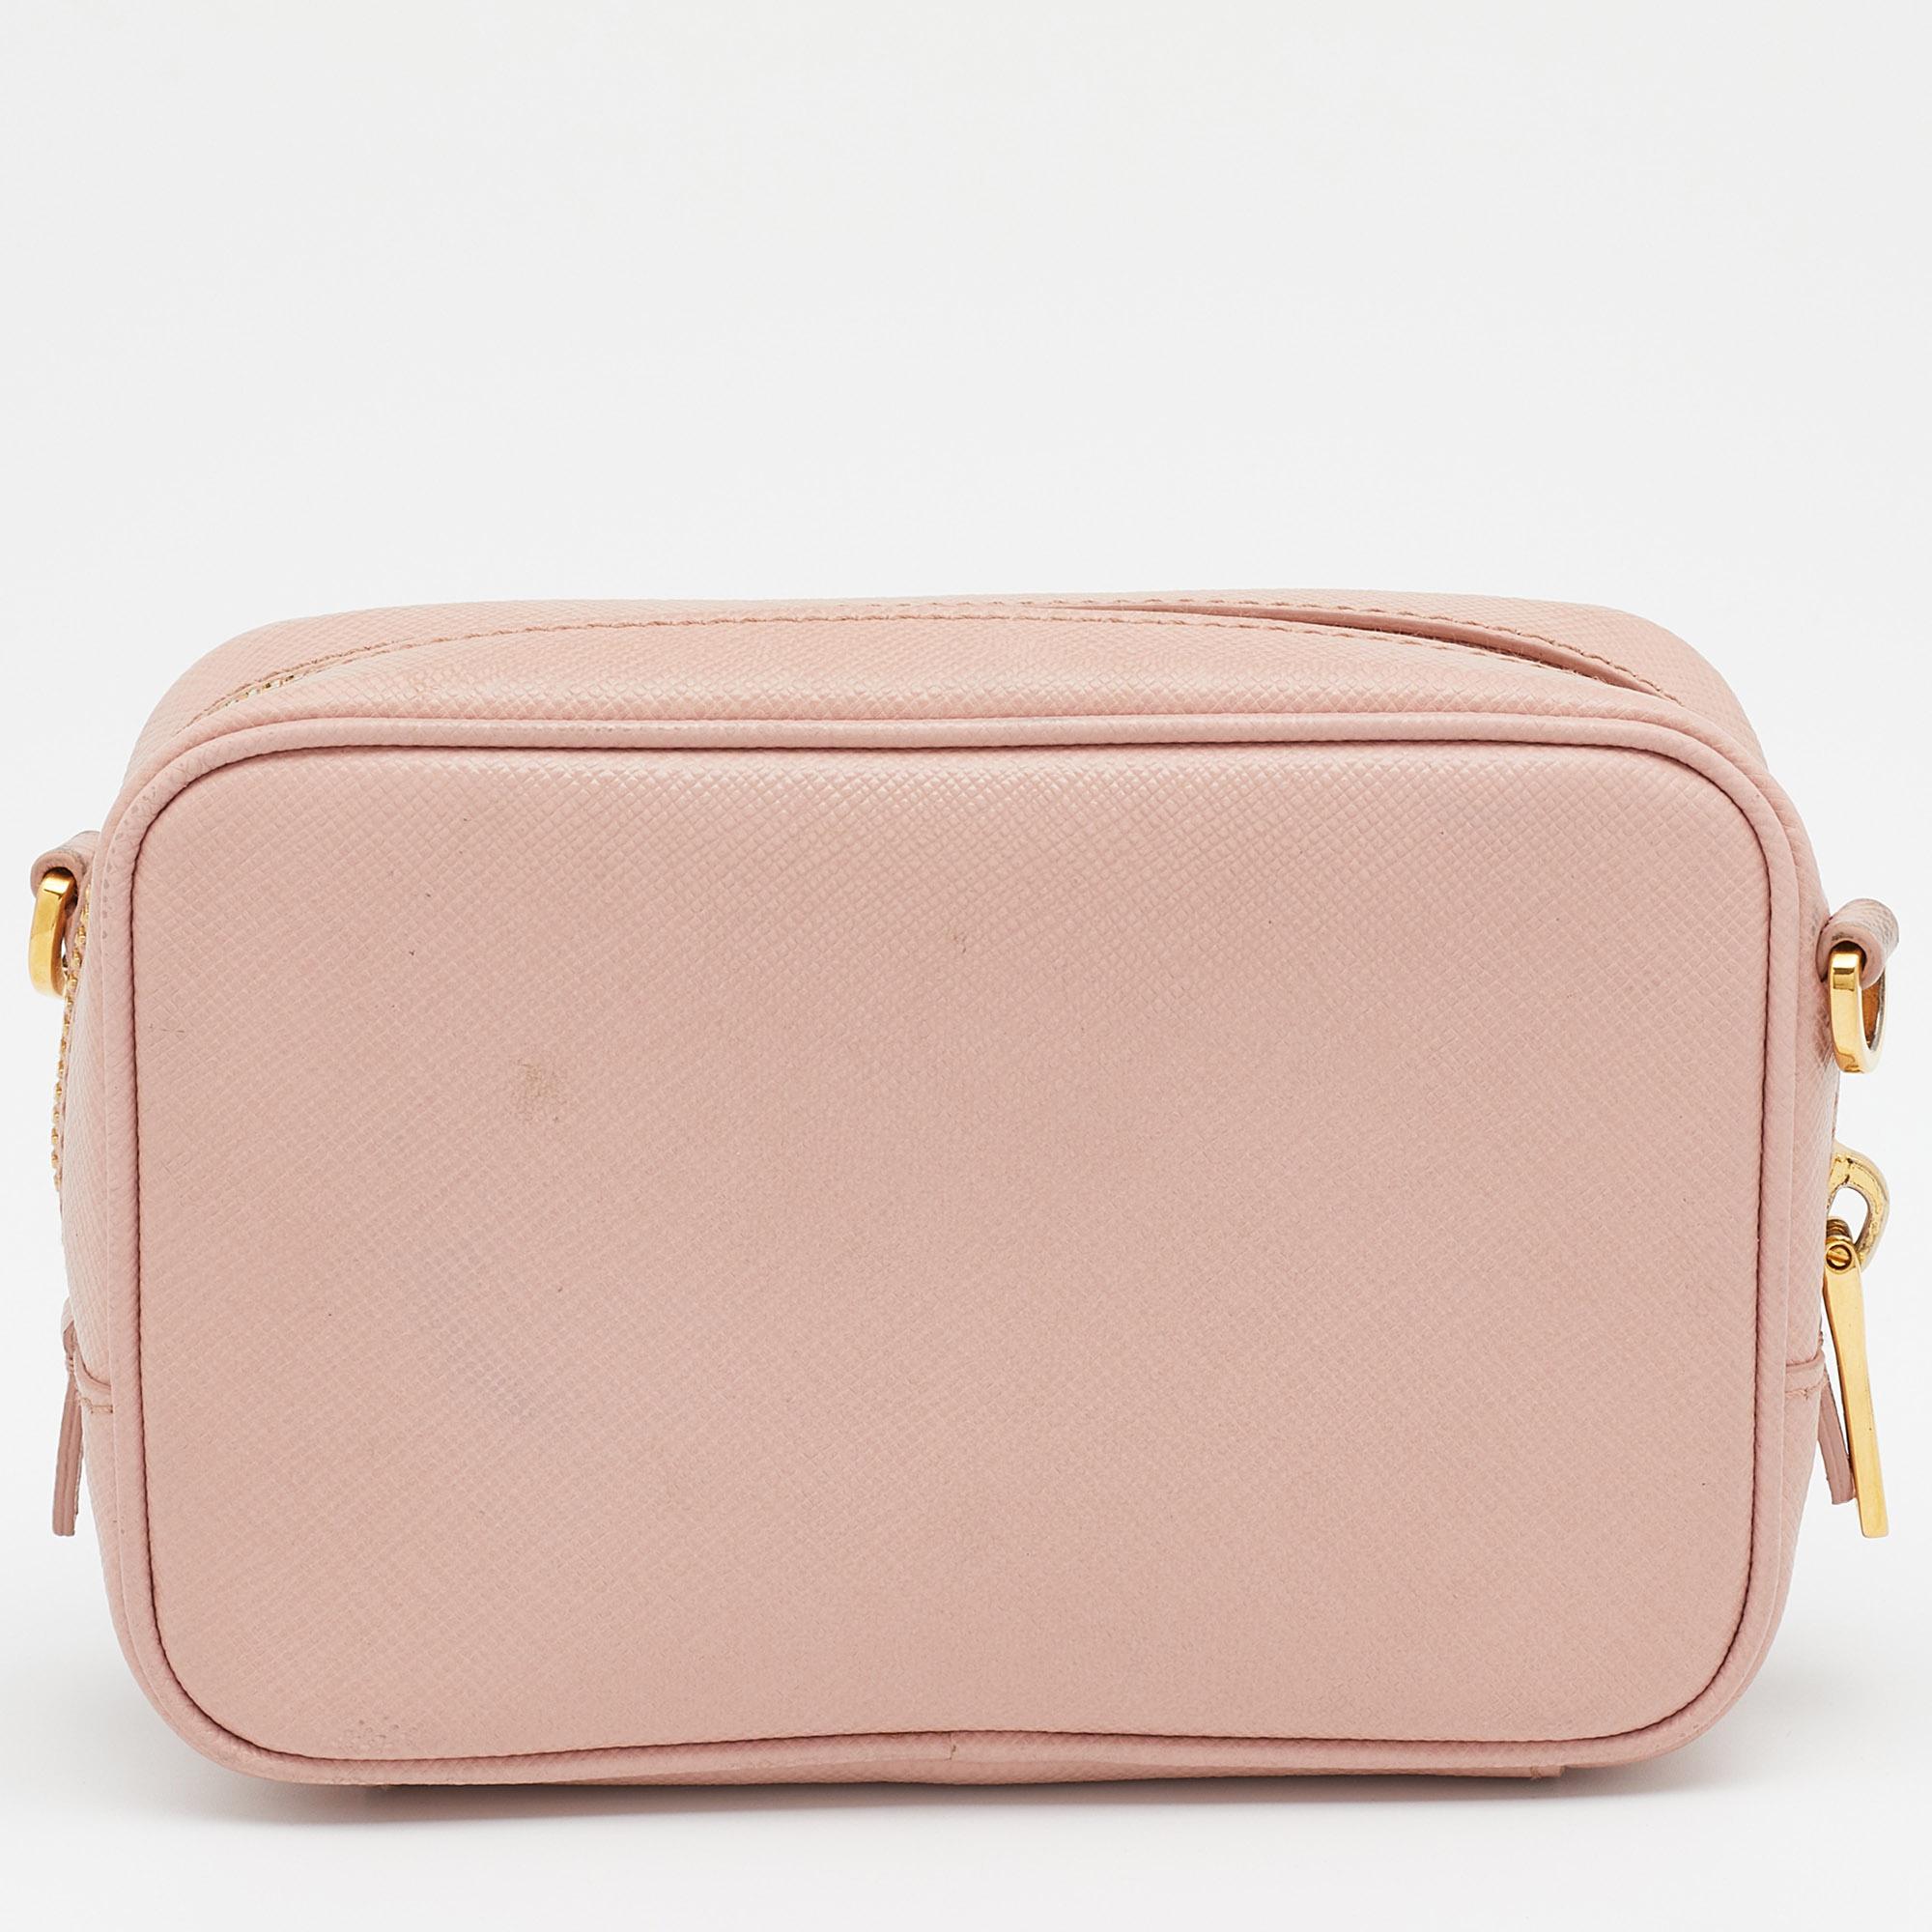 This Prada camera bag is a timeless piece that will last you season after season. This bag is made of light pink Saffiano leather and sized to house your absolute must-haves. It has a long shoulder strap, a lined compartment, front logo detailing,